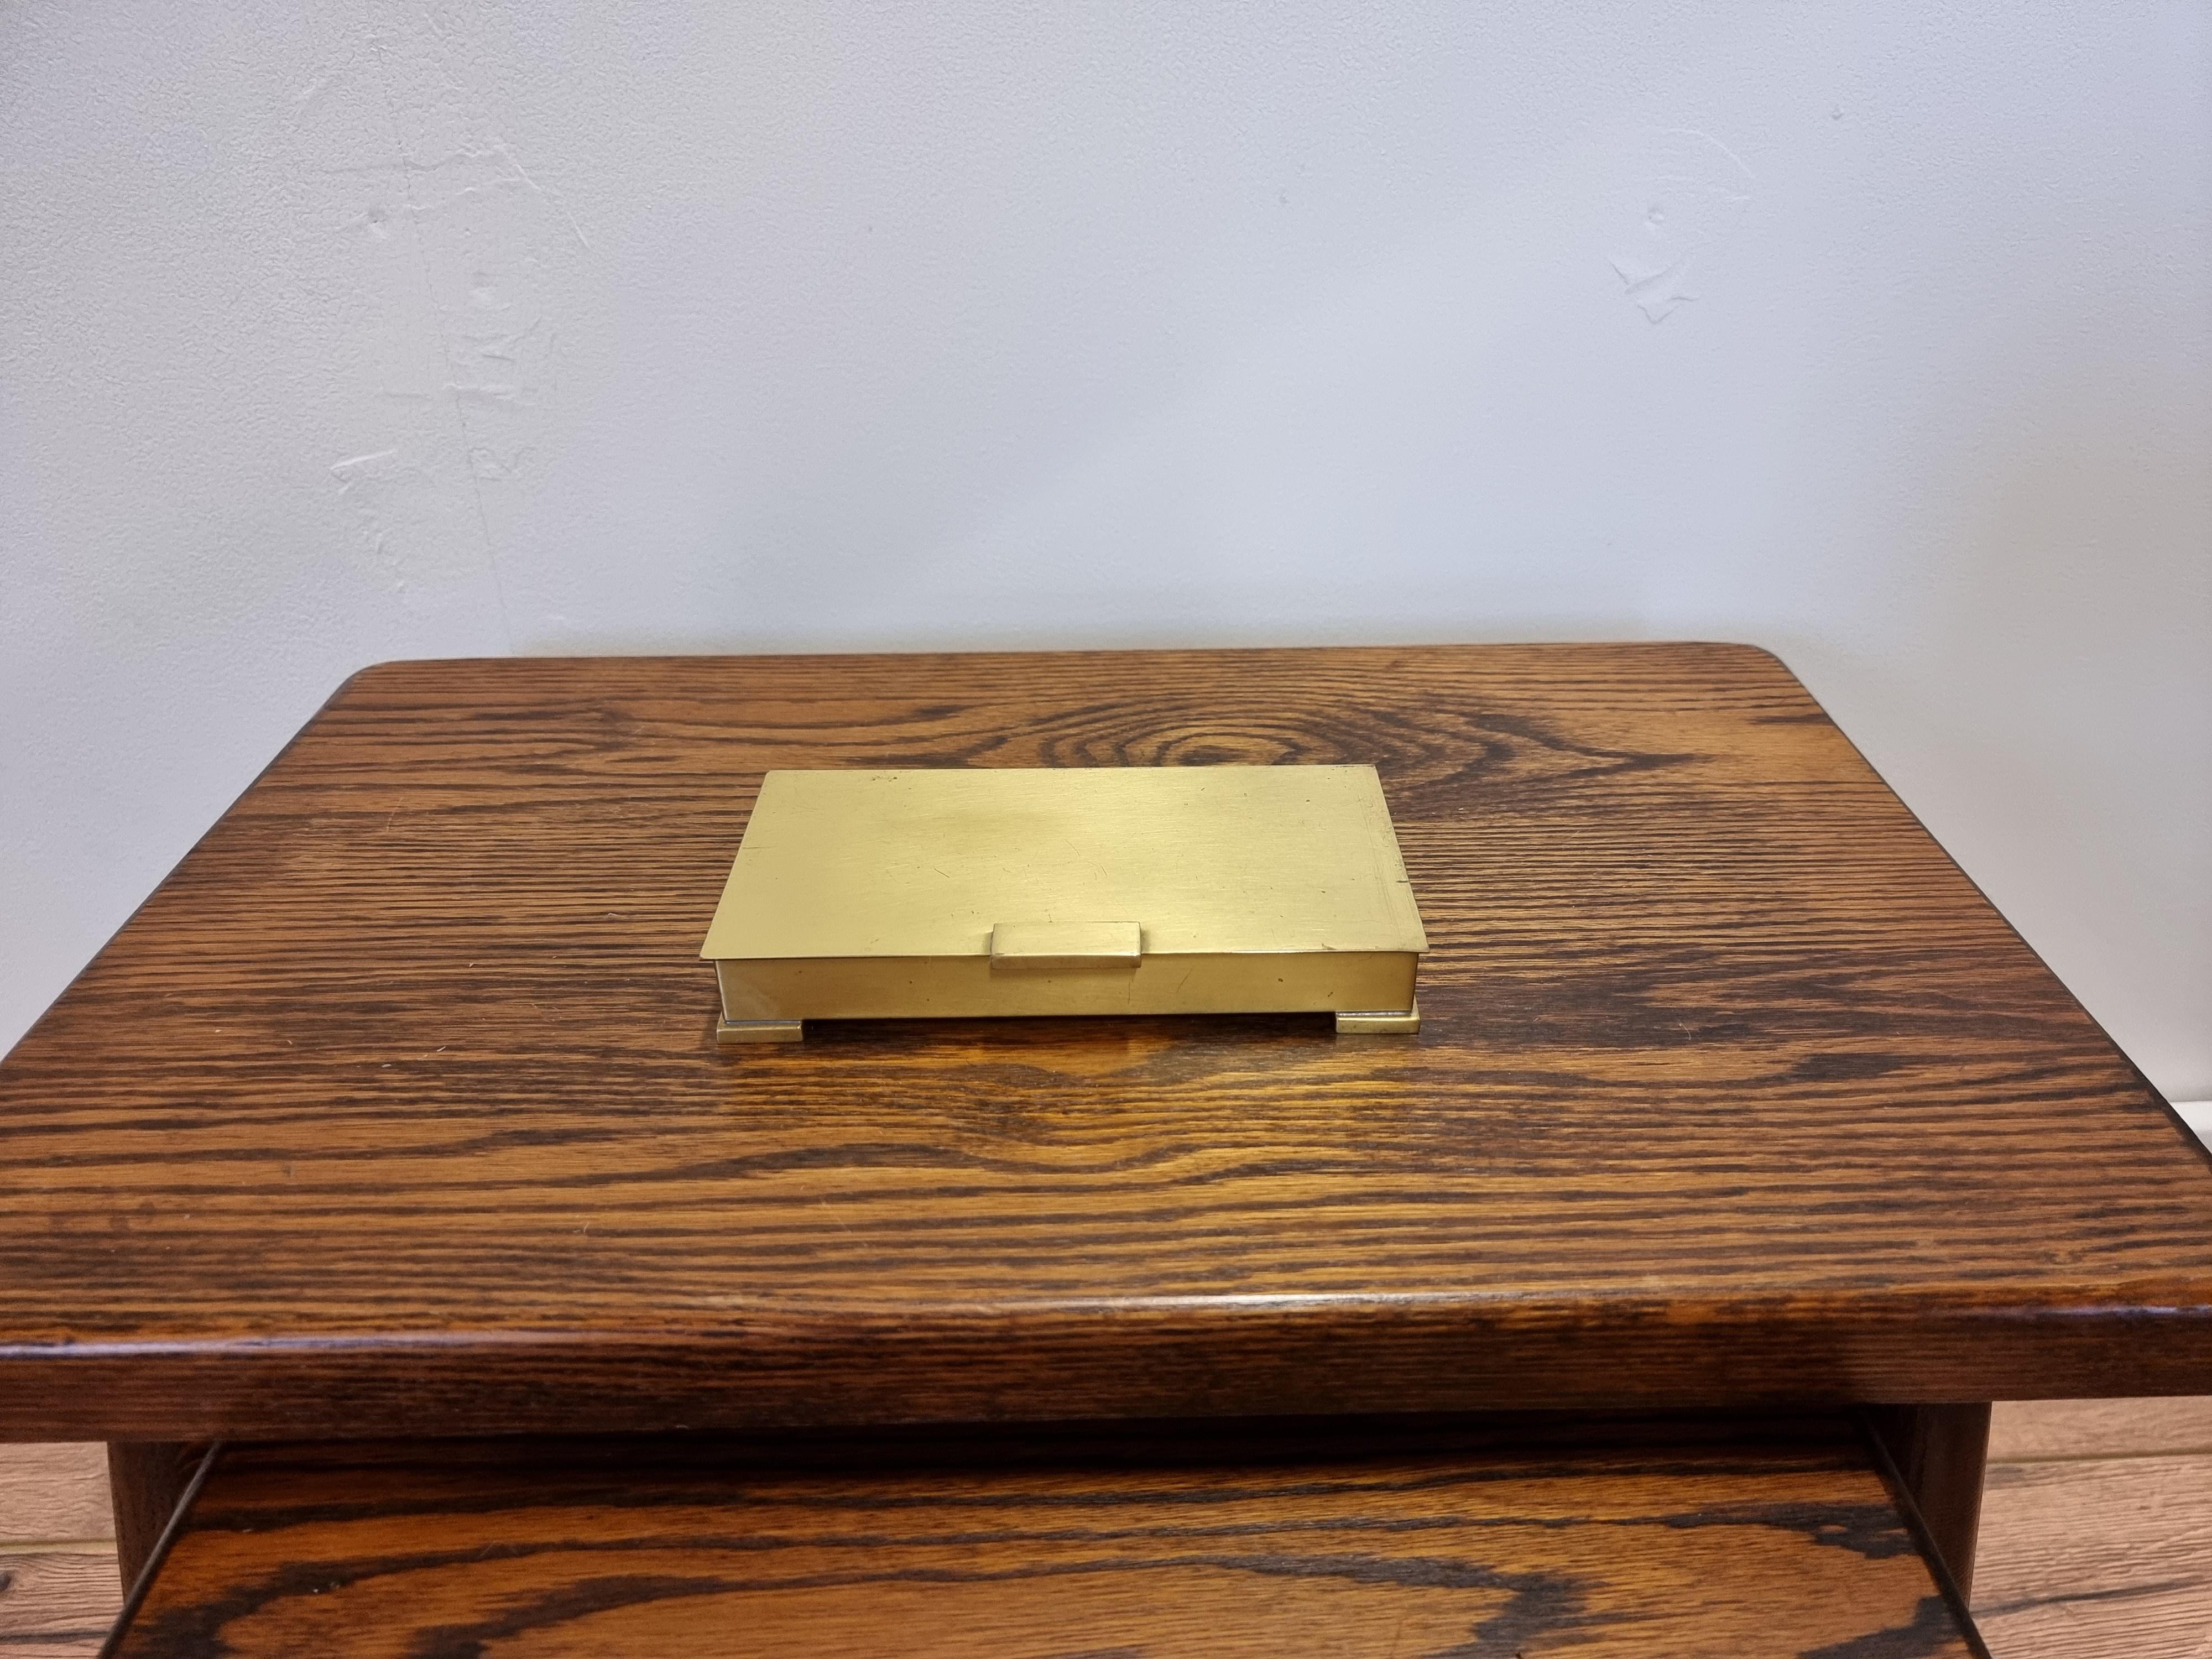 Tobacco/Decorative Box, Scandinavian Modern, Perfect for a Personal Engravering 7